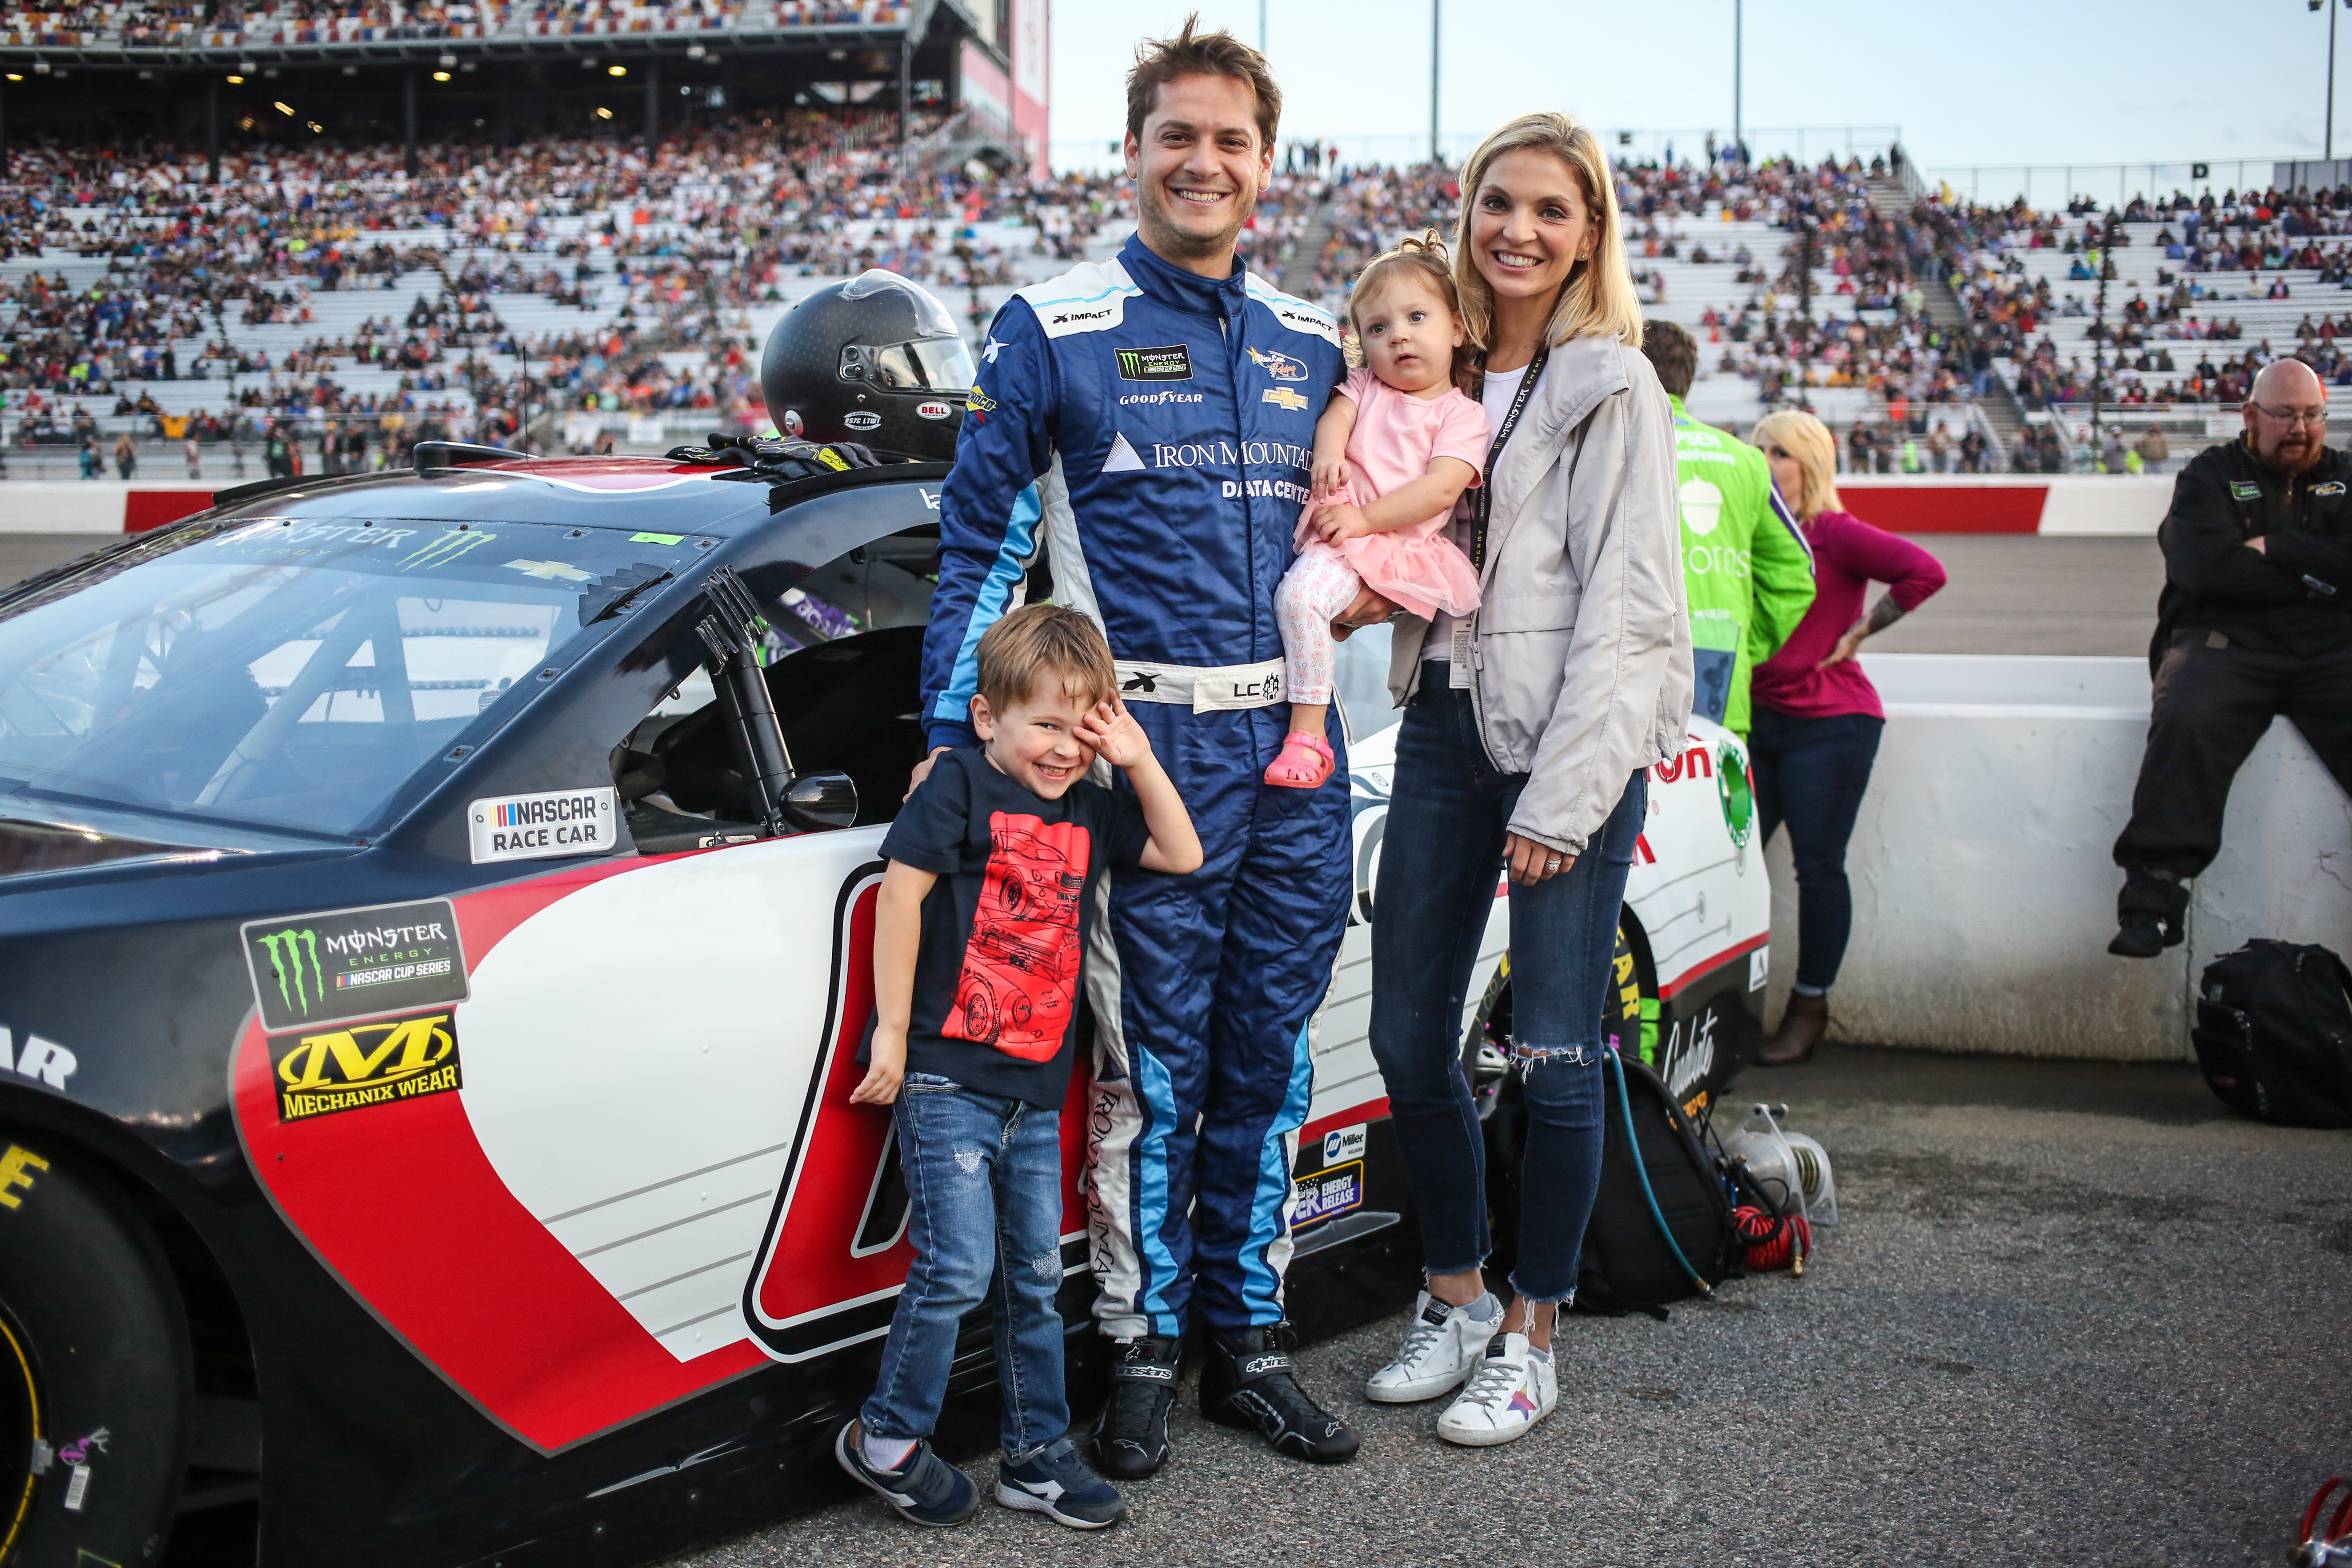 The Cassill family spending precious time before the race at Richmond. (Photo Credit: Jonathan Huff/TPF)